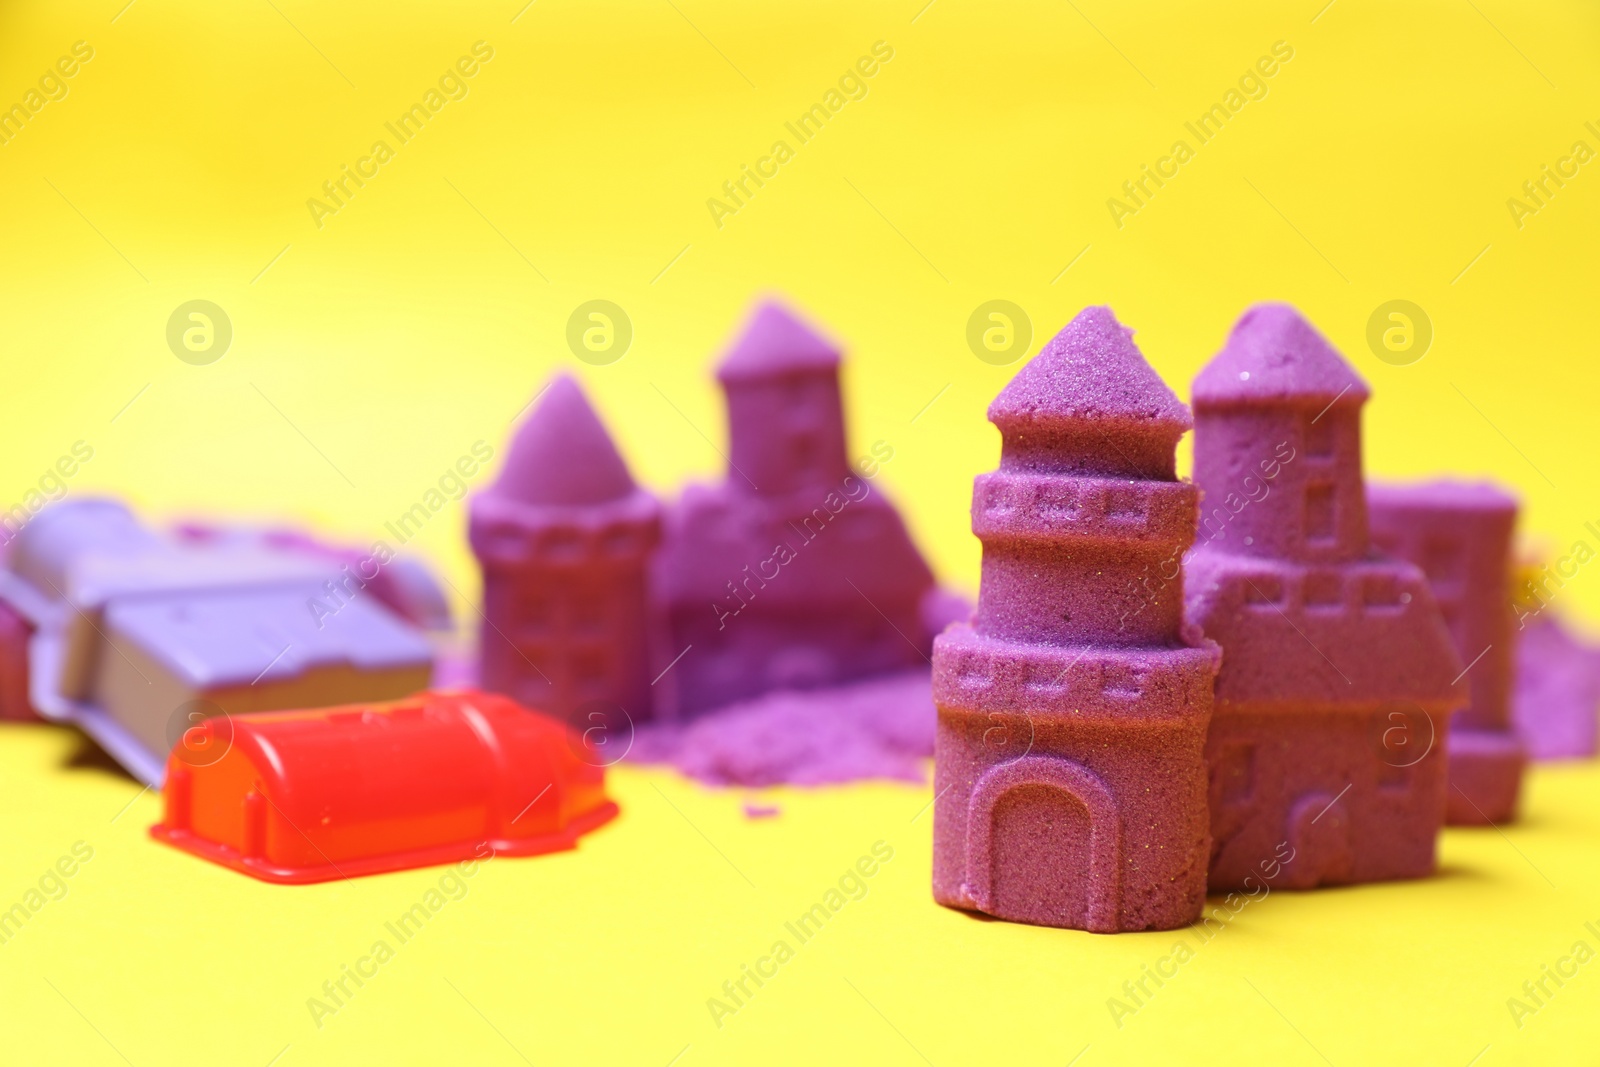 Photo of Castle figures made of kinetic sand and plastic toys on yellow background, closeup